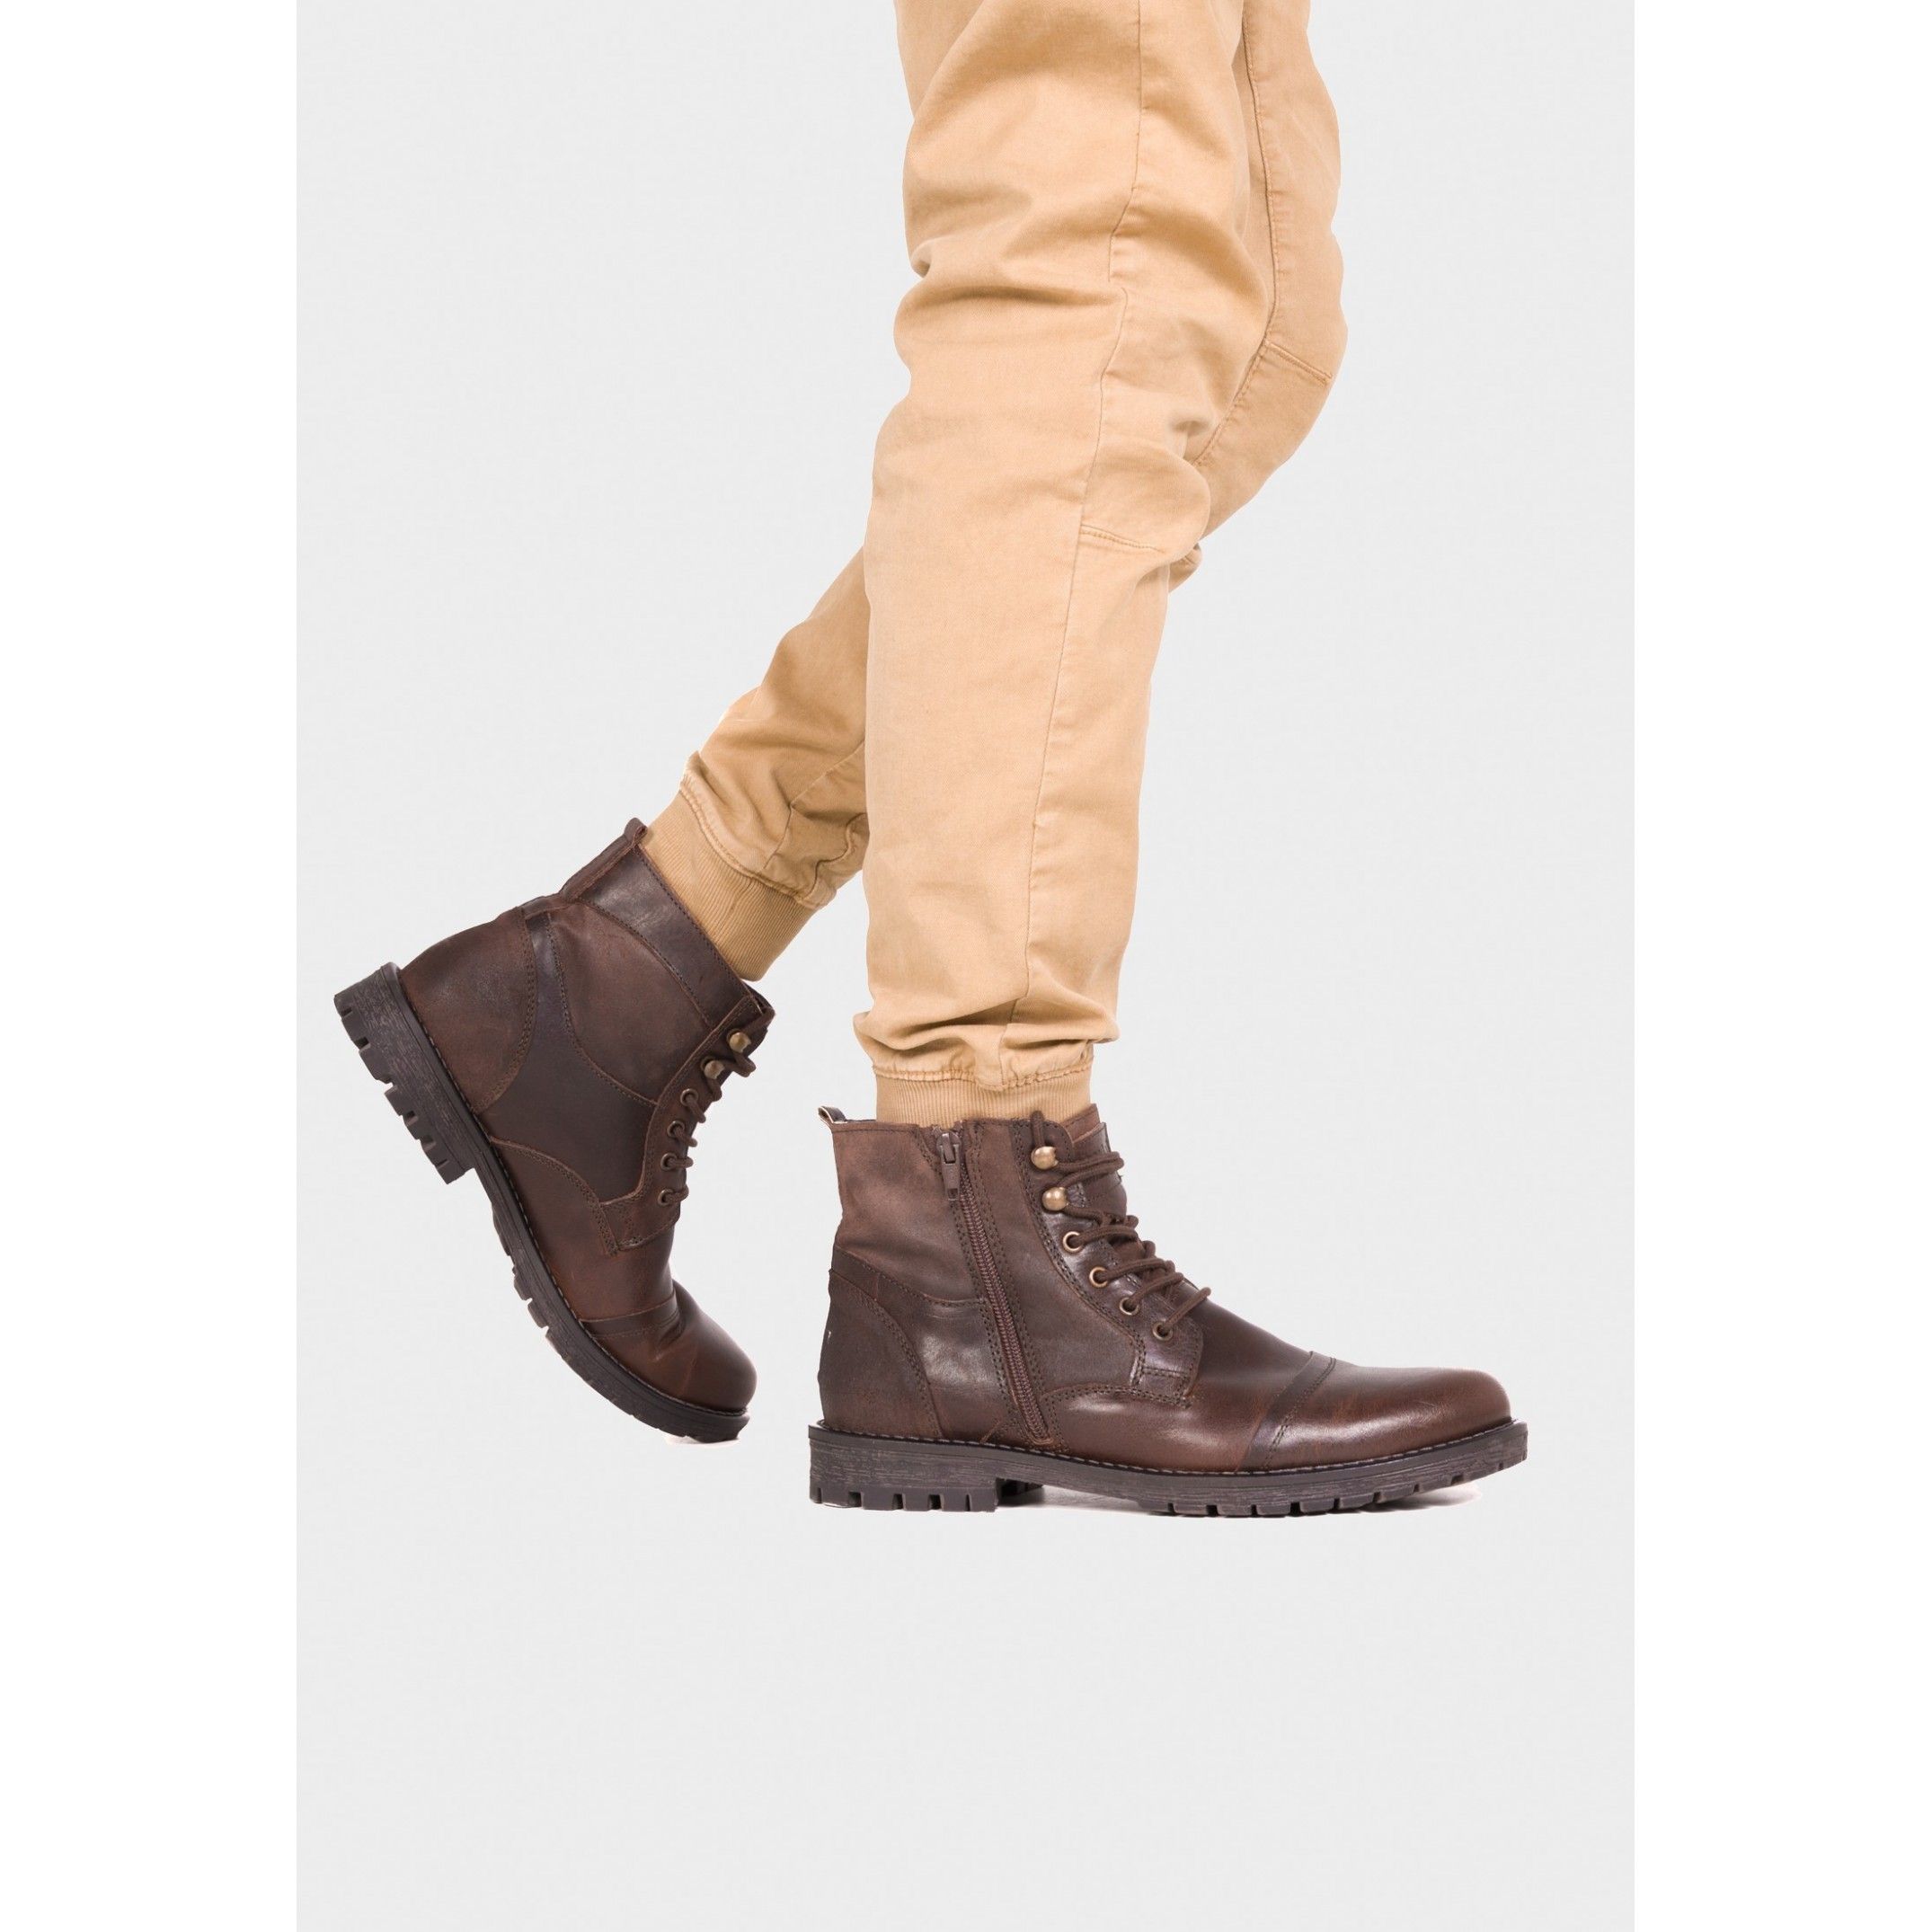 Leather boot by Son Castellanisimos. Closure: laces. Upper: leather. Innerr: textile. Insole: textile. Sole: non-slip. Heel: 3 cm. Made in Spain.